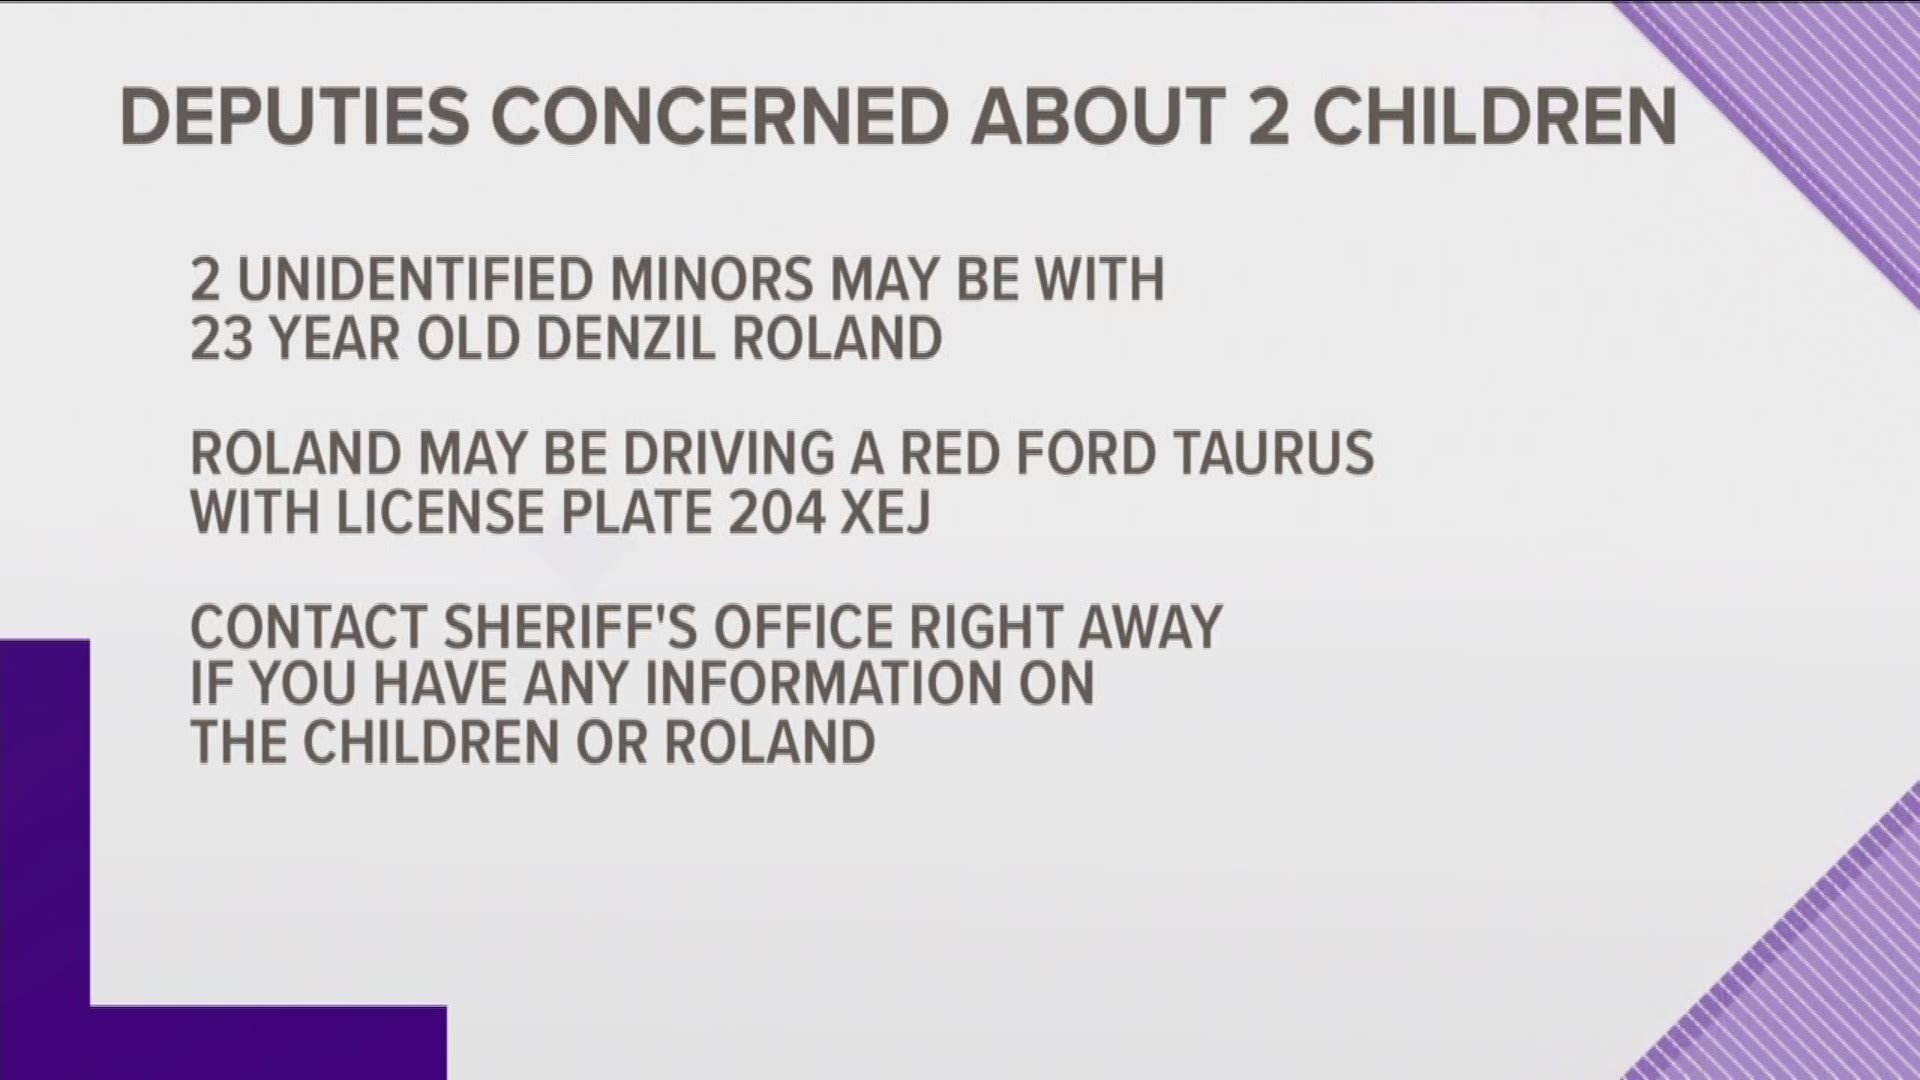 Sheriff's deputies are looking for two missing children.